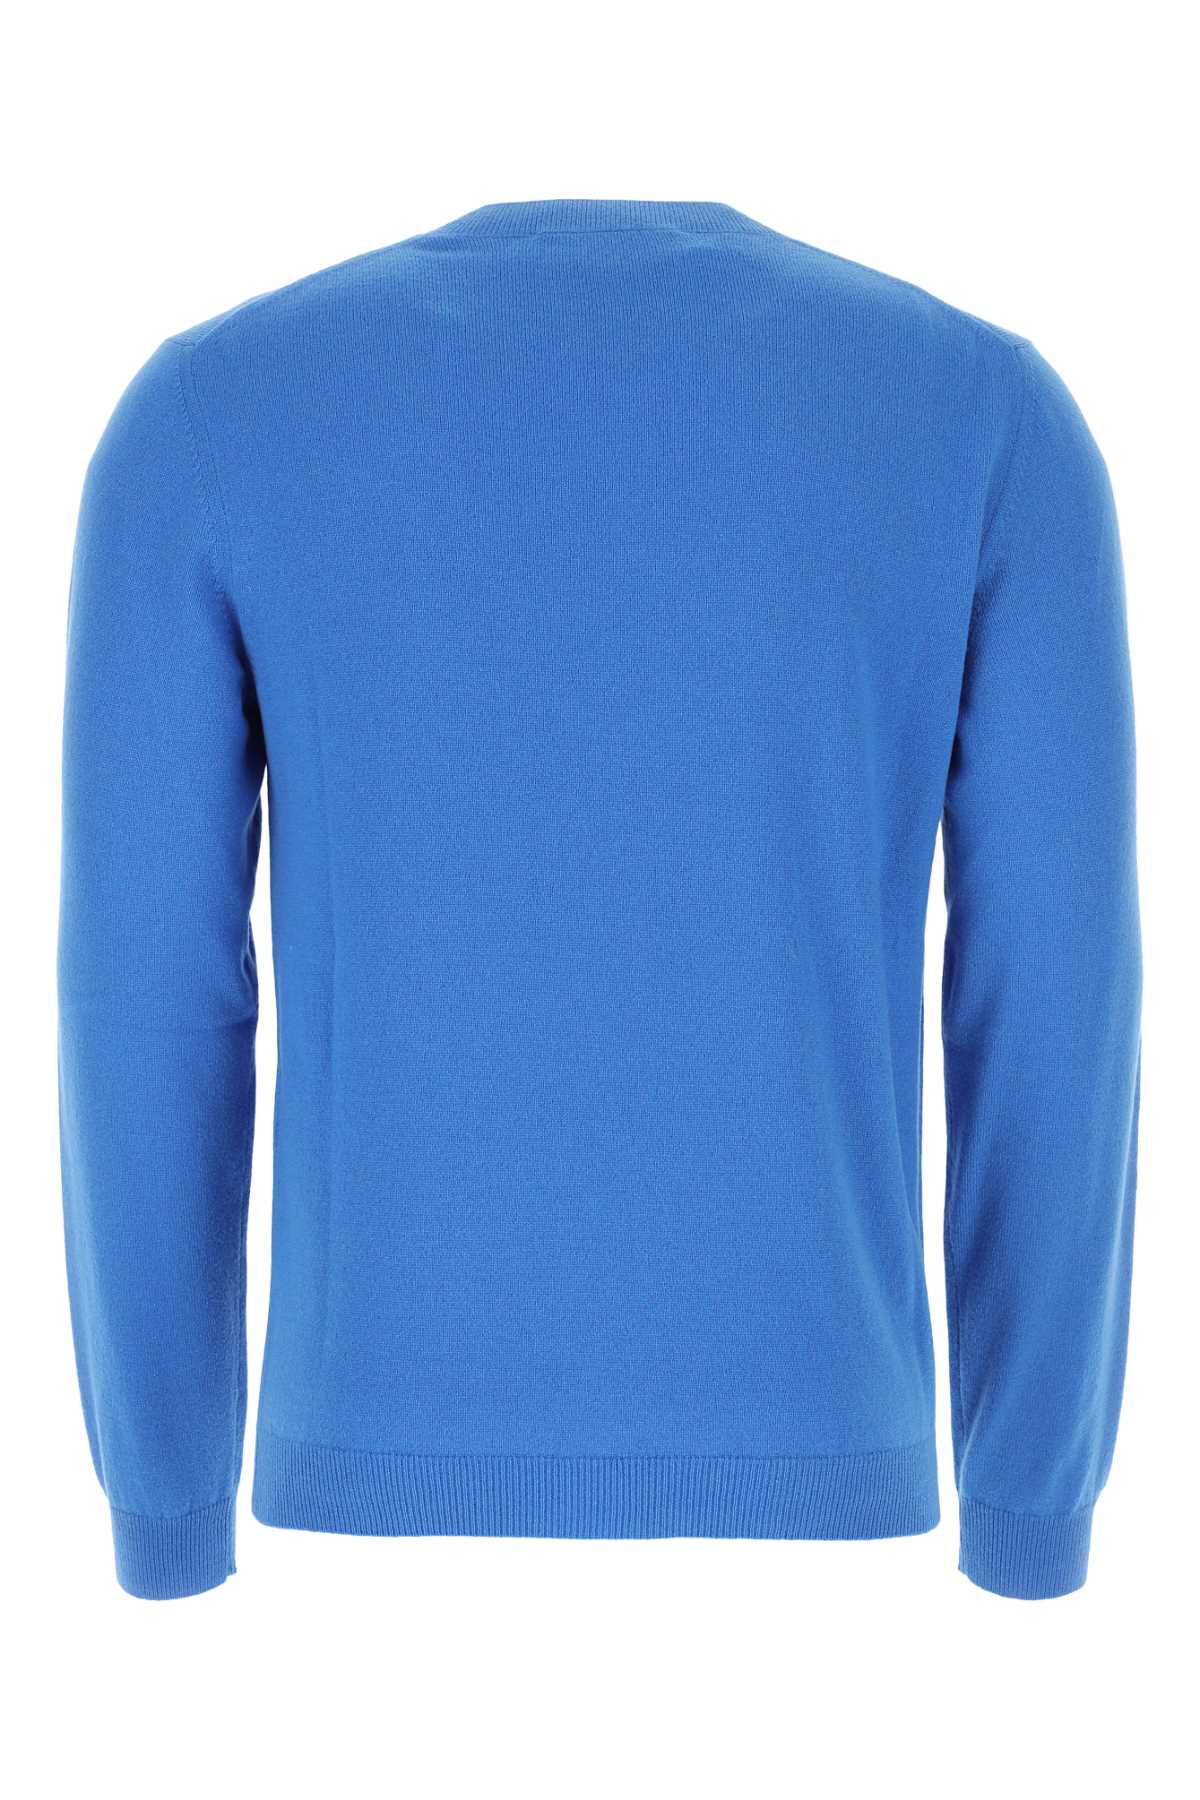 GUCCI TURQUOISE CASHMERE SWEATER